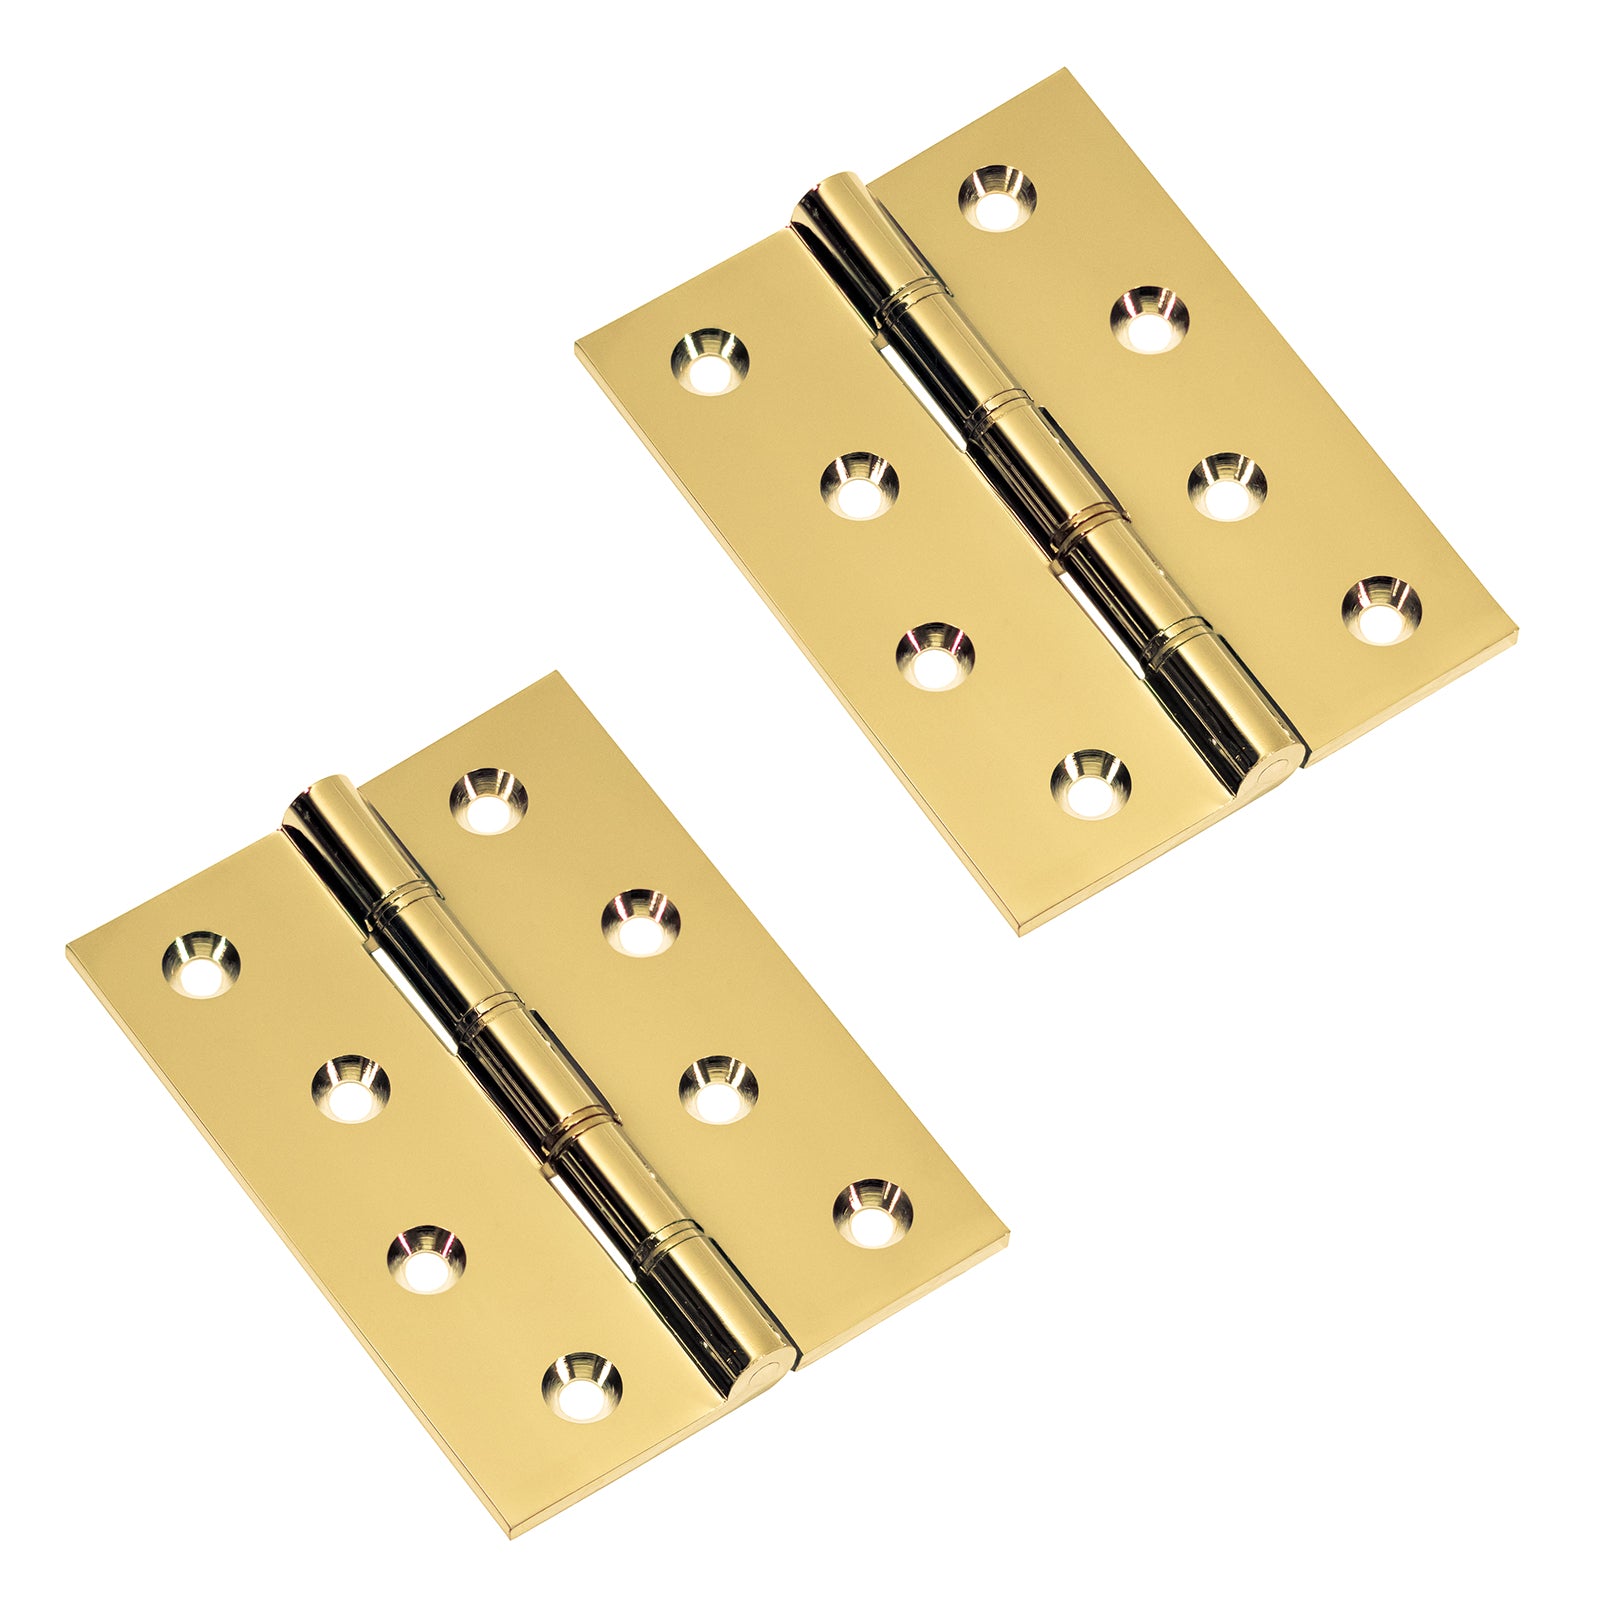 Solid Brass 4 Inch Butt Hinge in Polished Brass Finish